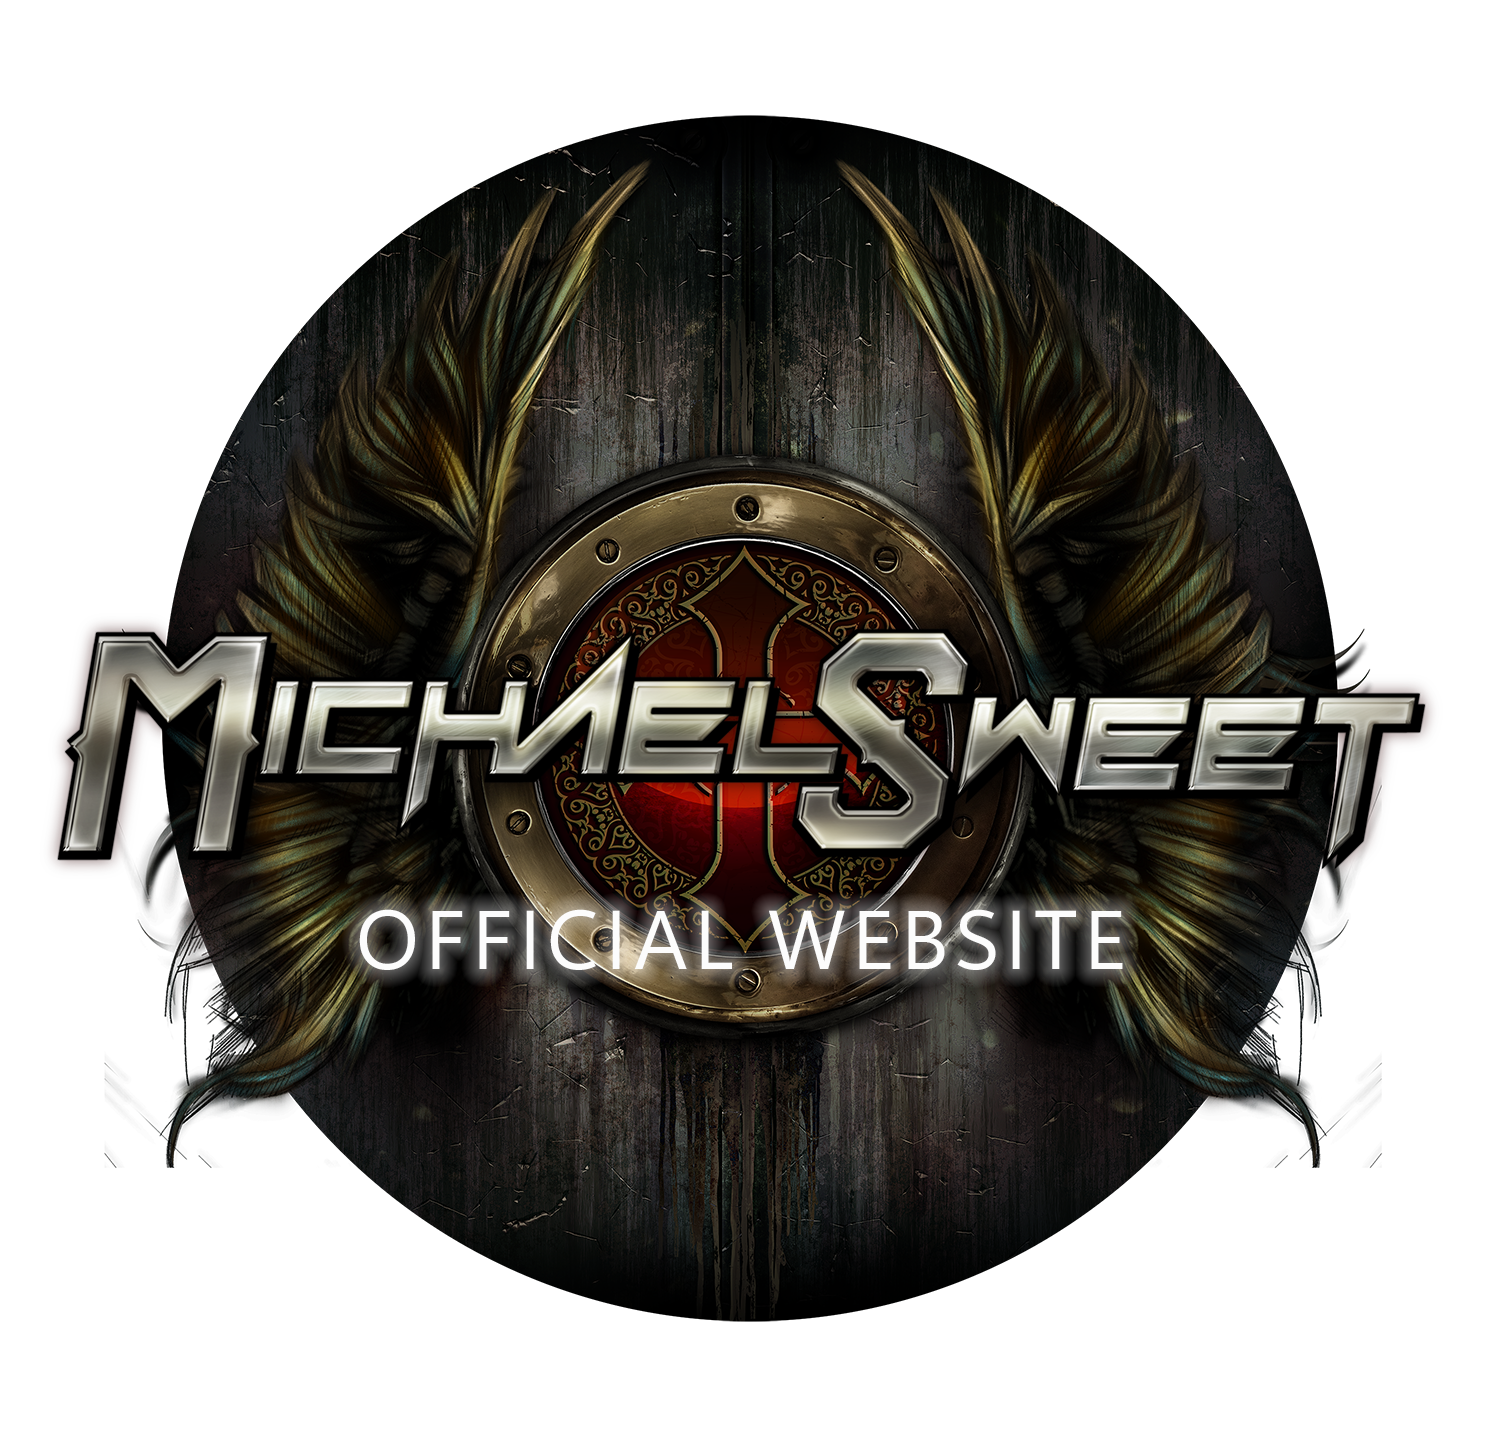 MICHAEL SWEET - The Official Website